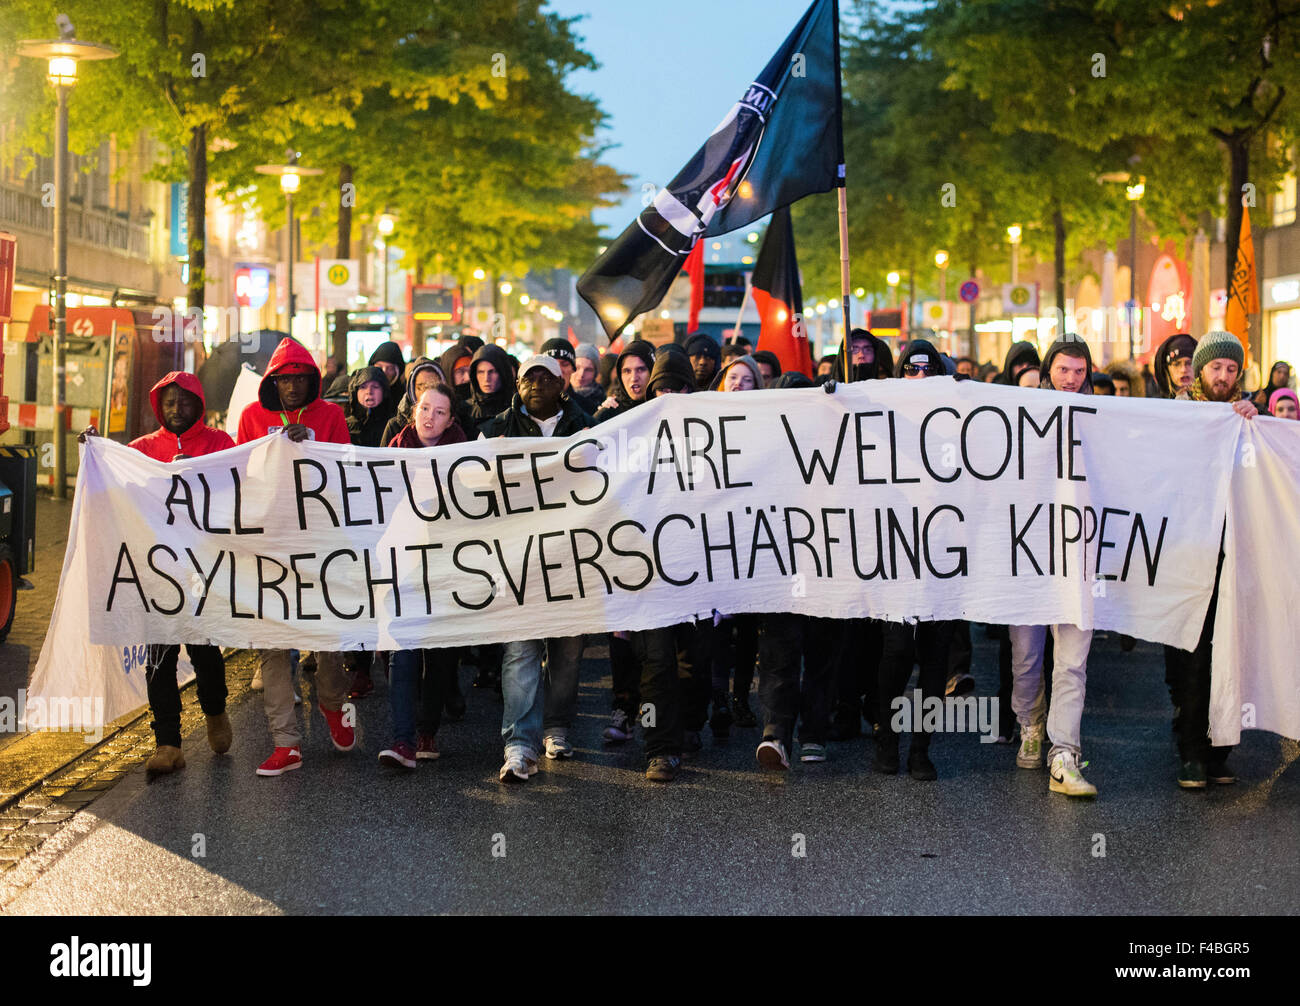 Hamburg, Germany. 15th Oct, 2015. Several hundred people march through the centre of Hamburg to protest the tightening of asylum laws, carrying a banner that reads 'All Refugees are welcome. Asylrechtsverschärfung kippen' (All Refugees are welcome. Overturn the tightening of the asylum laws), in Hamburg, Germany, 15 October 2015. Earlier, the German Bundestag passed a package of controversial changes to asylum law. PHOTO: DANIEL BOCKWOLDT/DPA/Alamy Live News Stock Photo